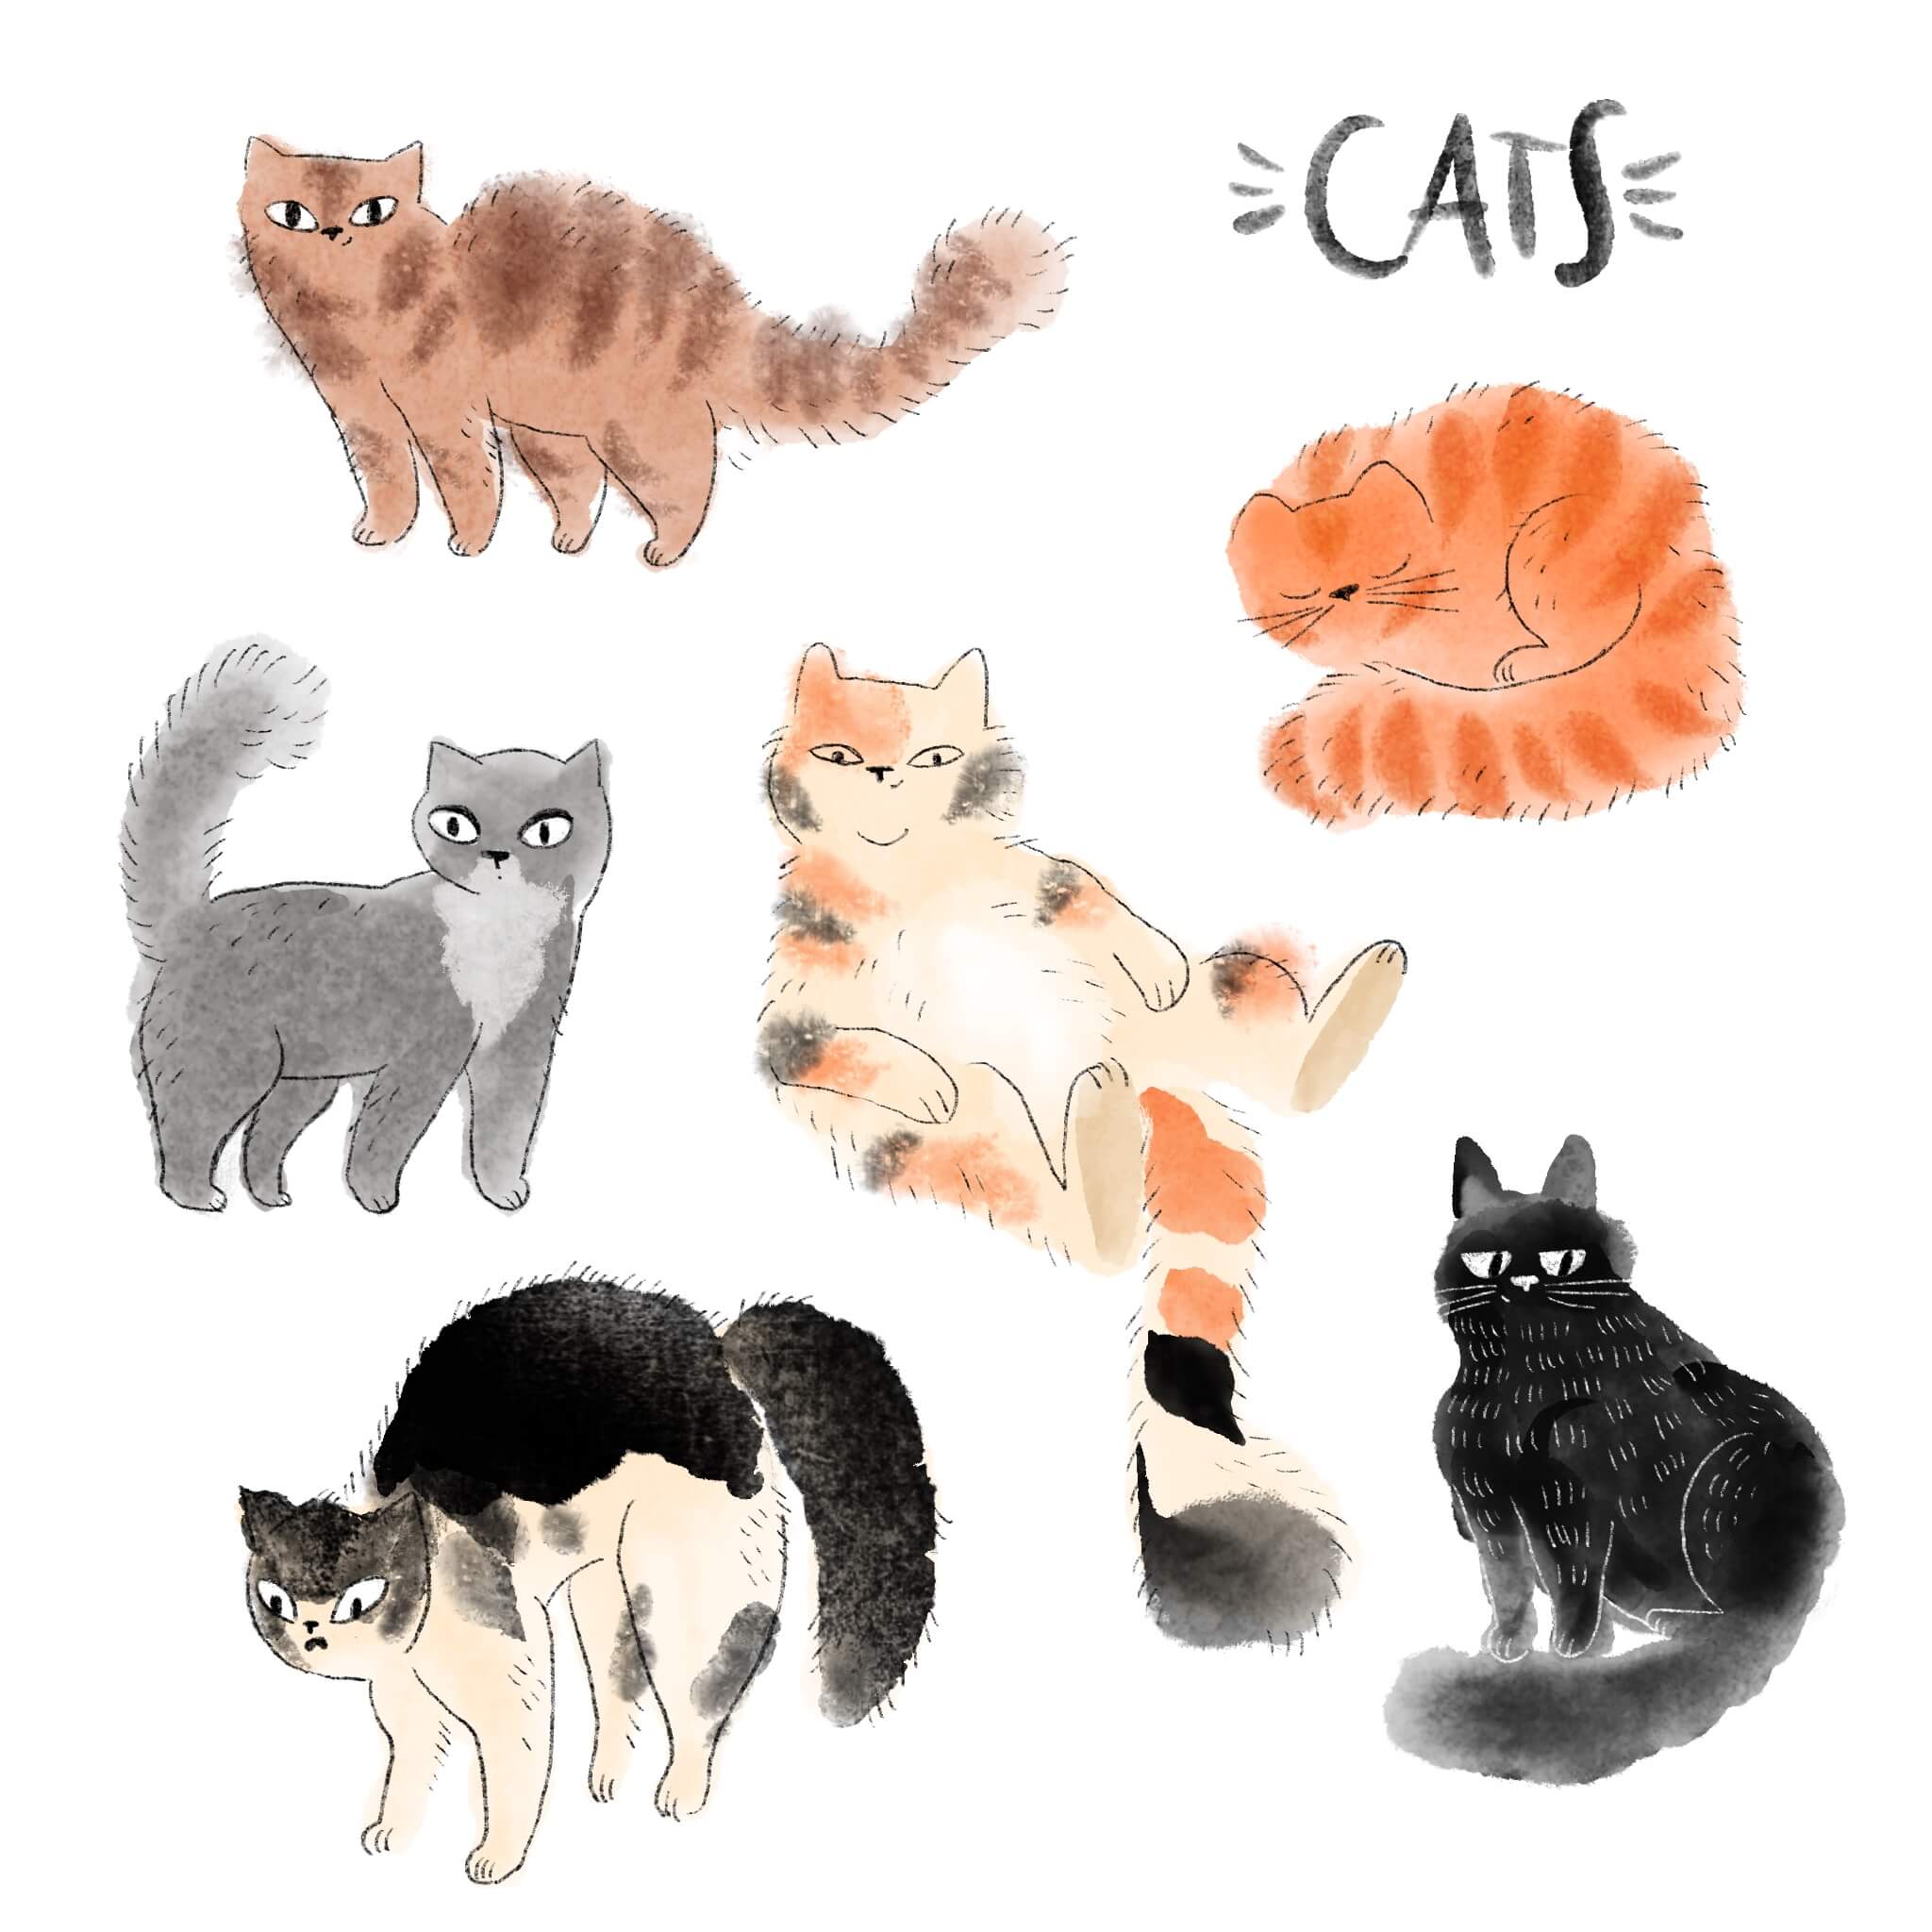 just a bunch of cats